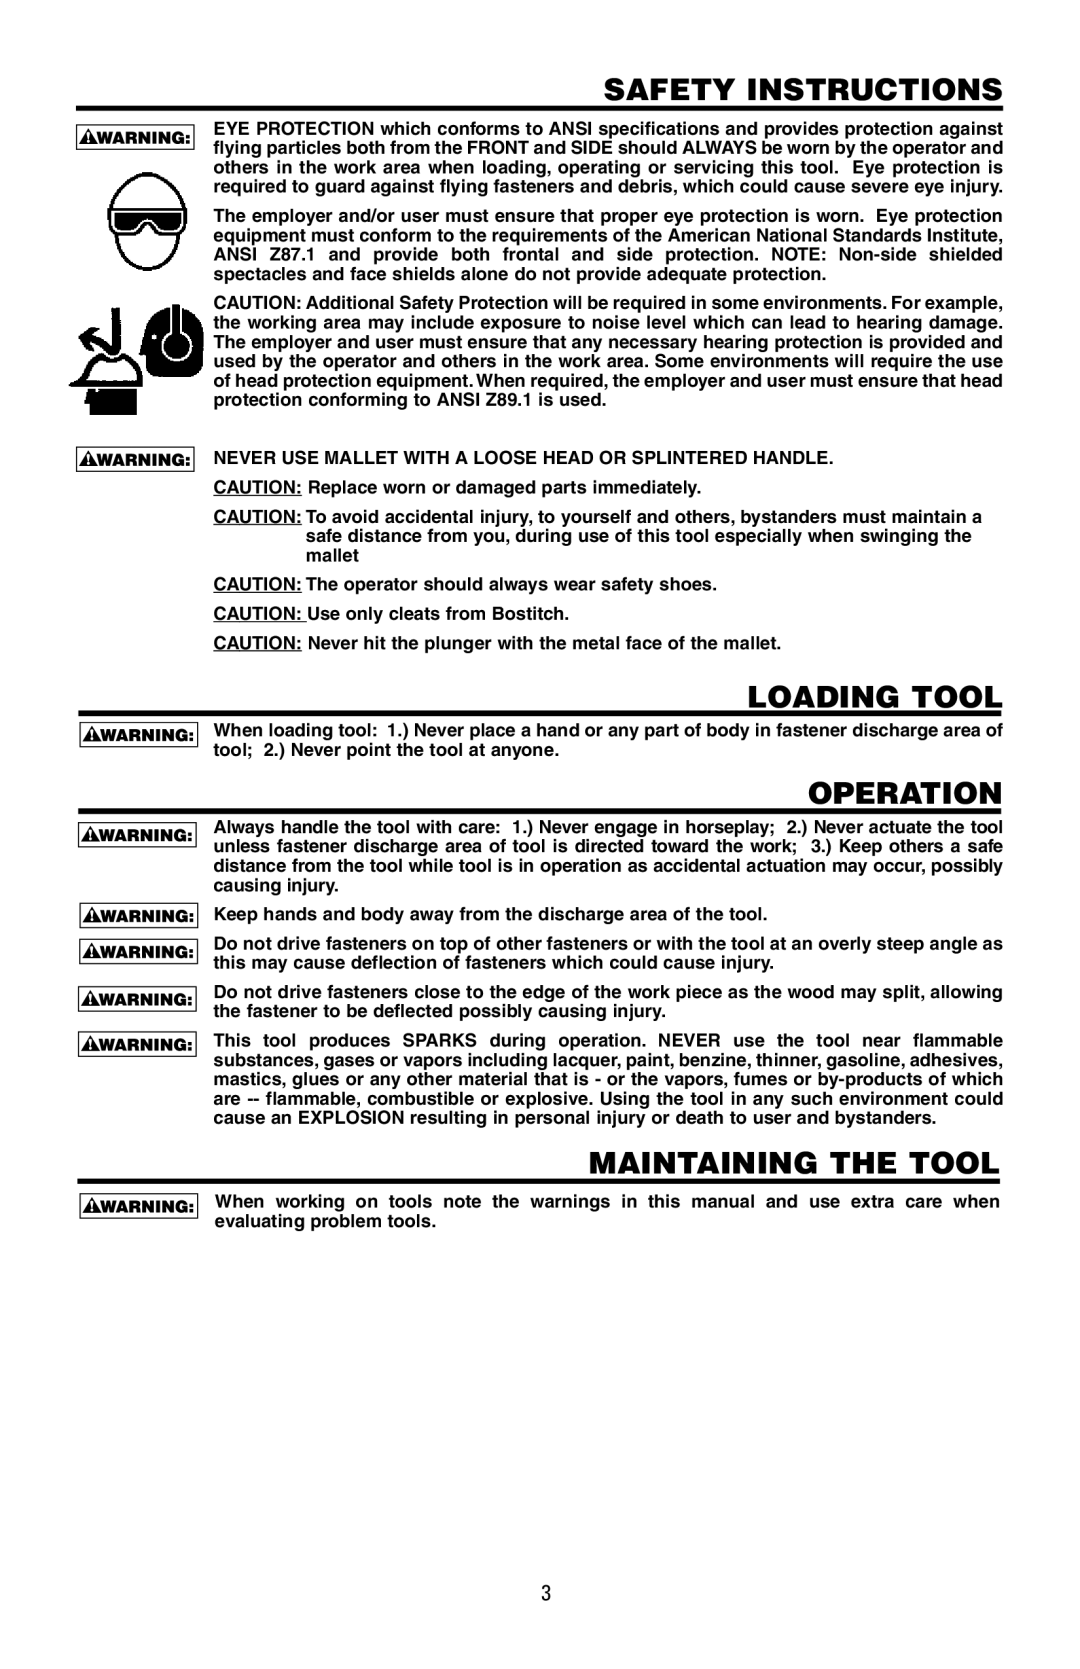 Intec MFN-200 manual Safety Instructions, Loading Tool, Operation, Maintaining The Tool 